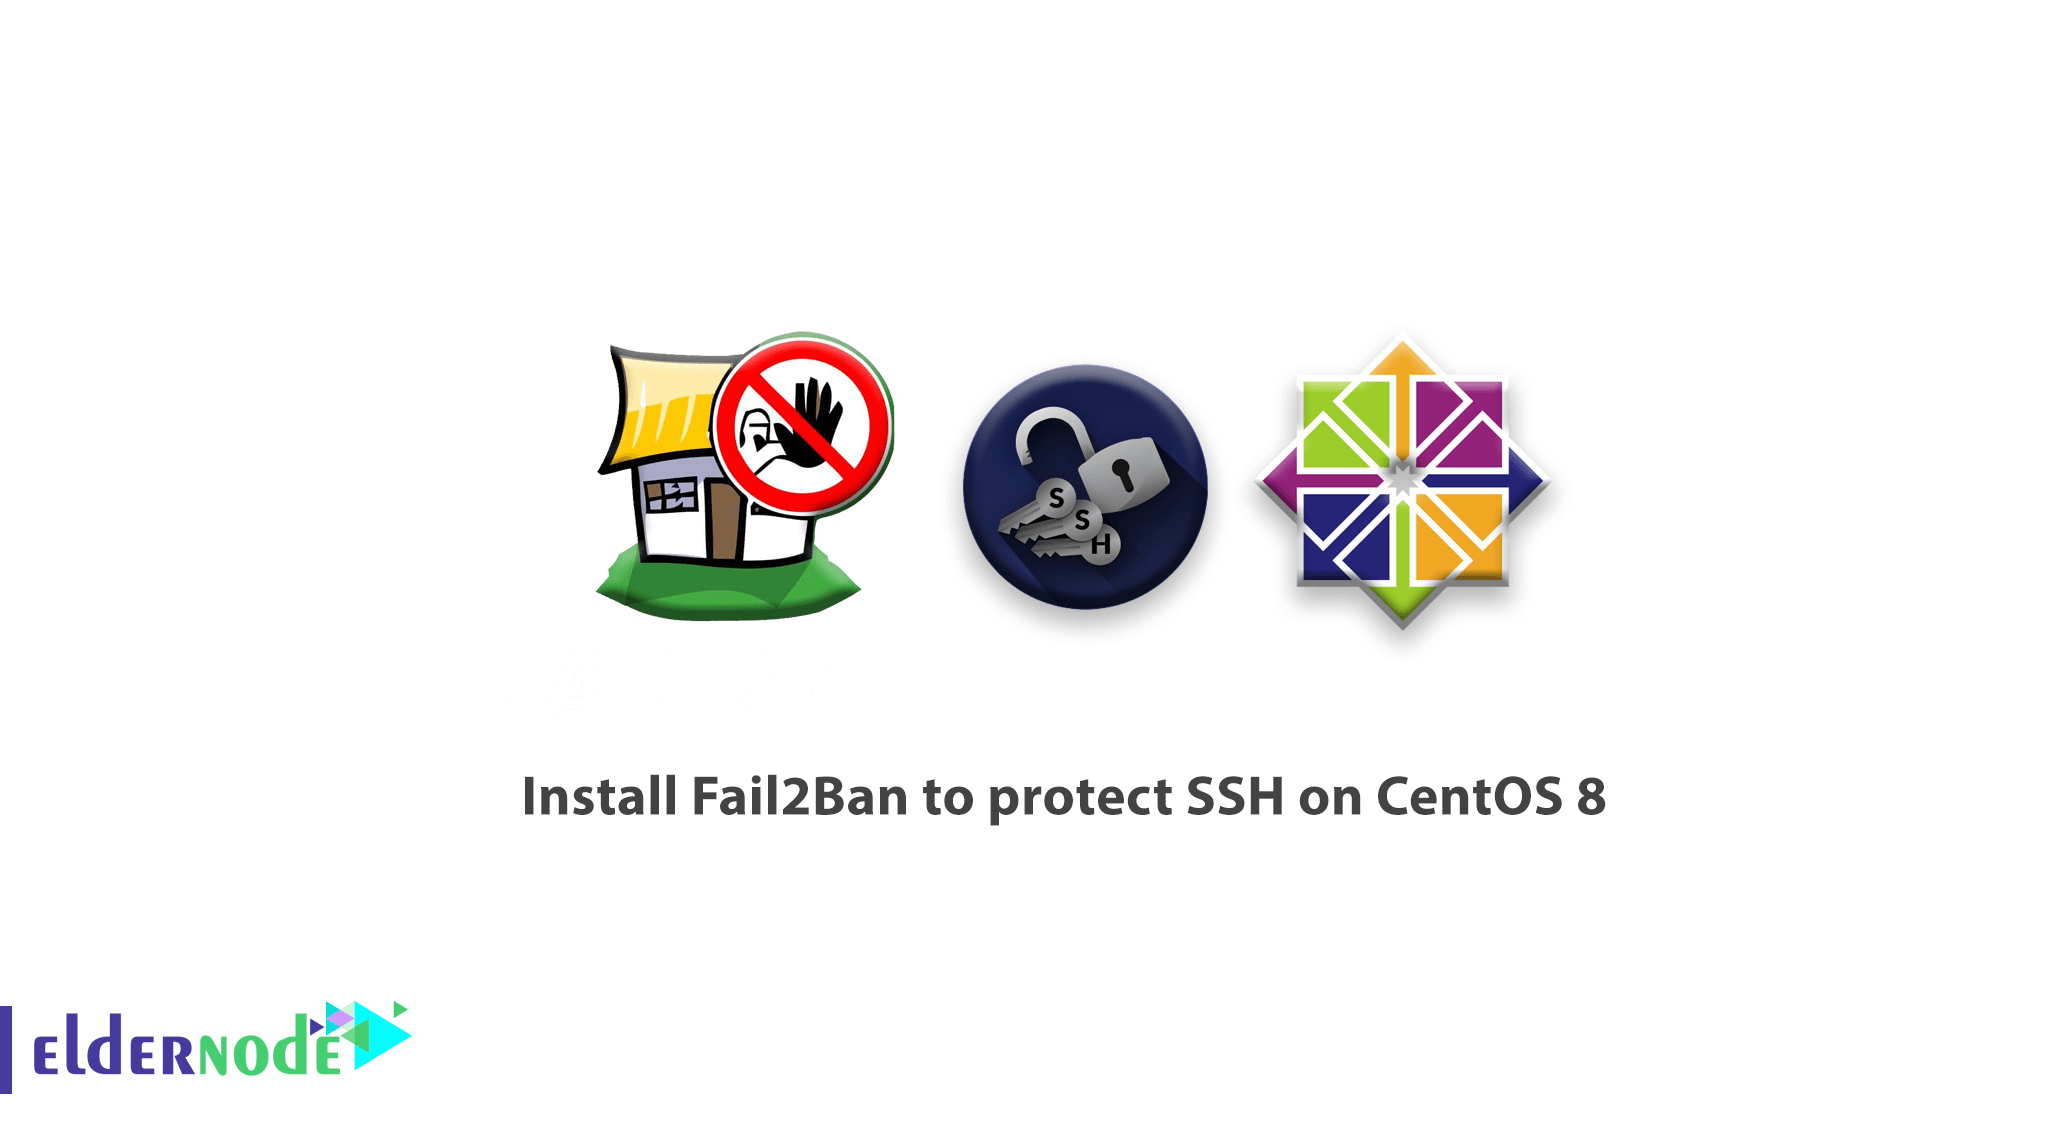 How to install Fail2Ban to protect SSH on CentOS 8